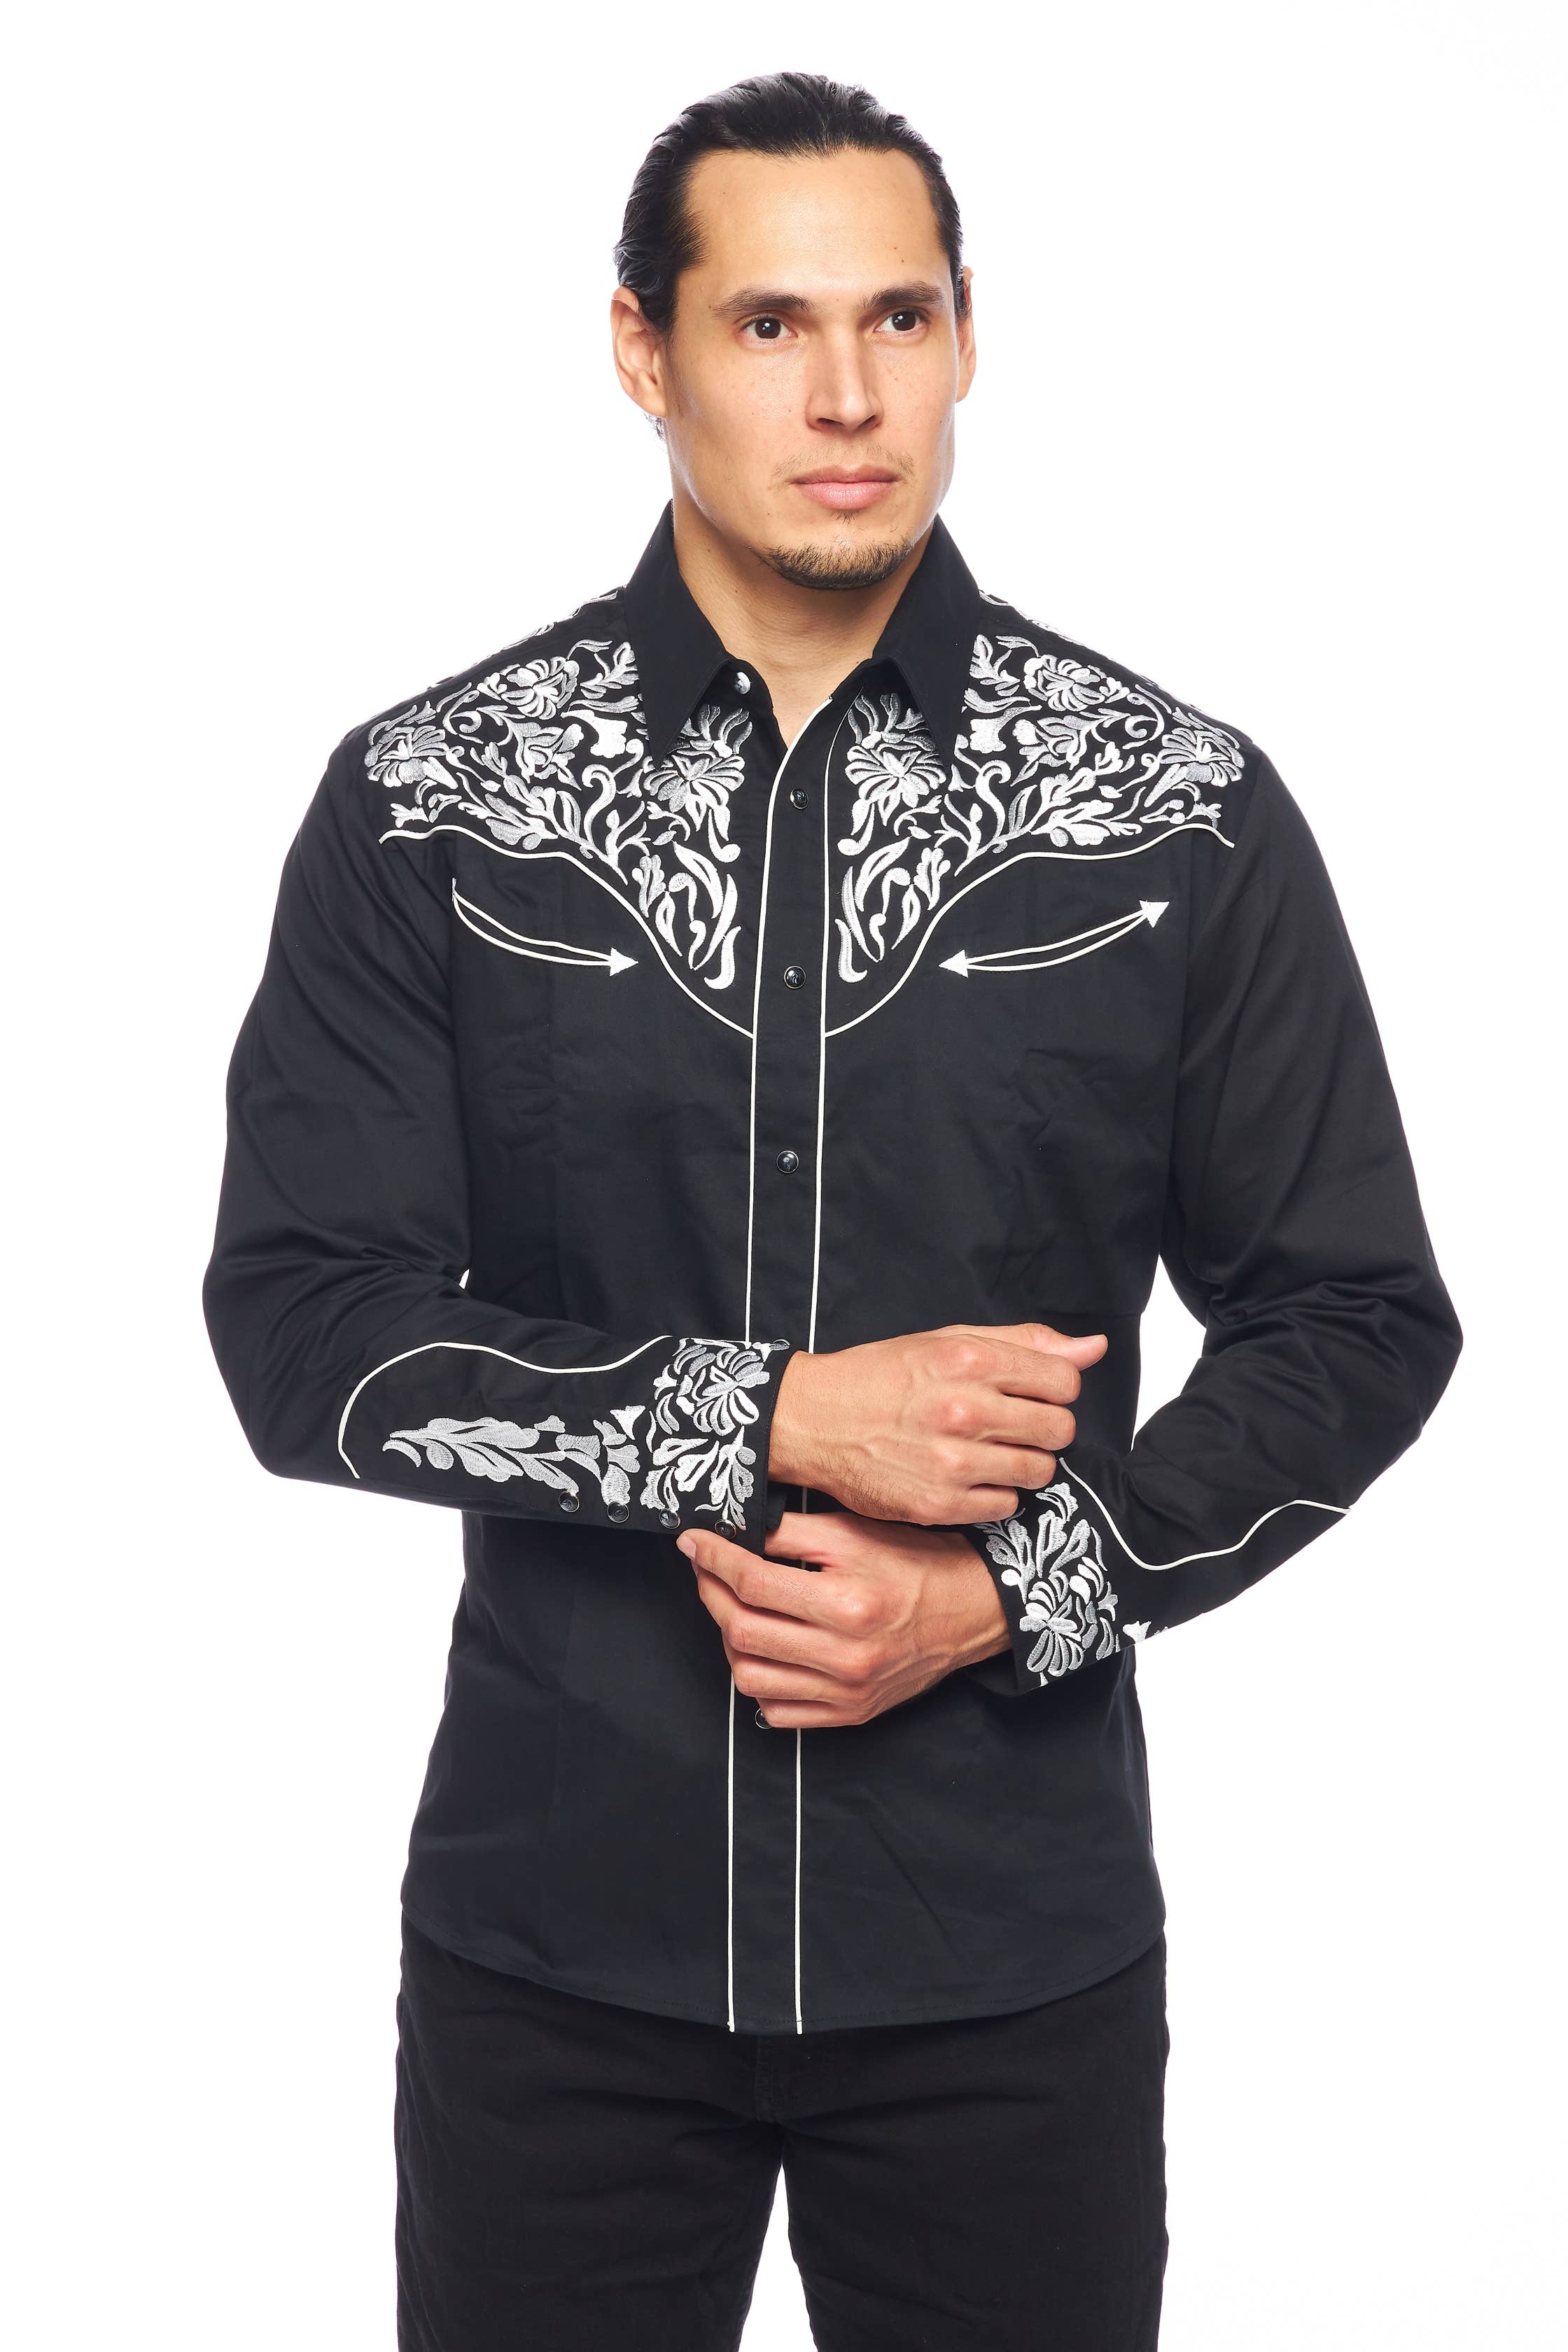 Rodeo Clothing - RODEO Men's Western Embroidery Cowboy Outfit Shirts